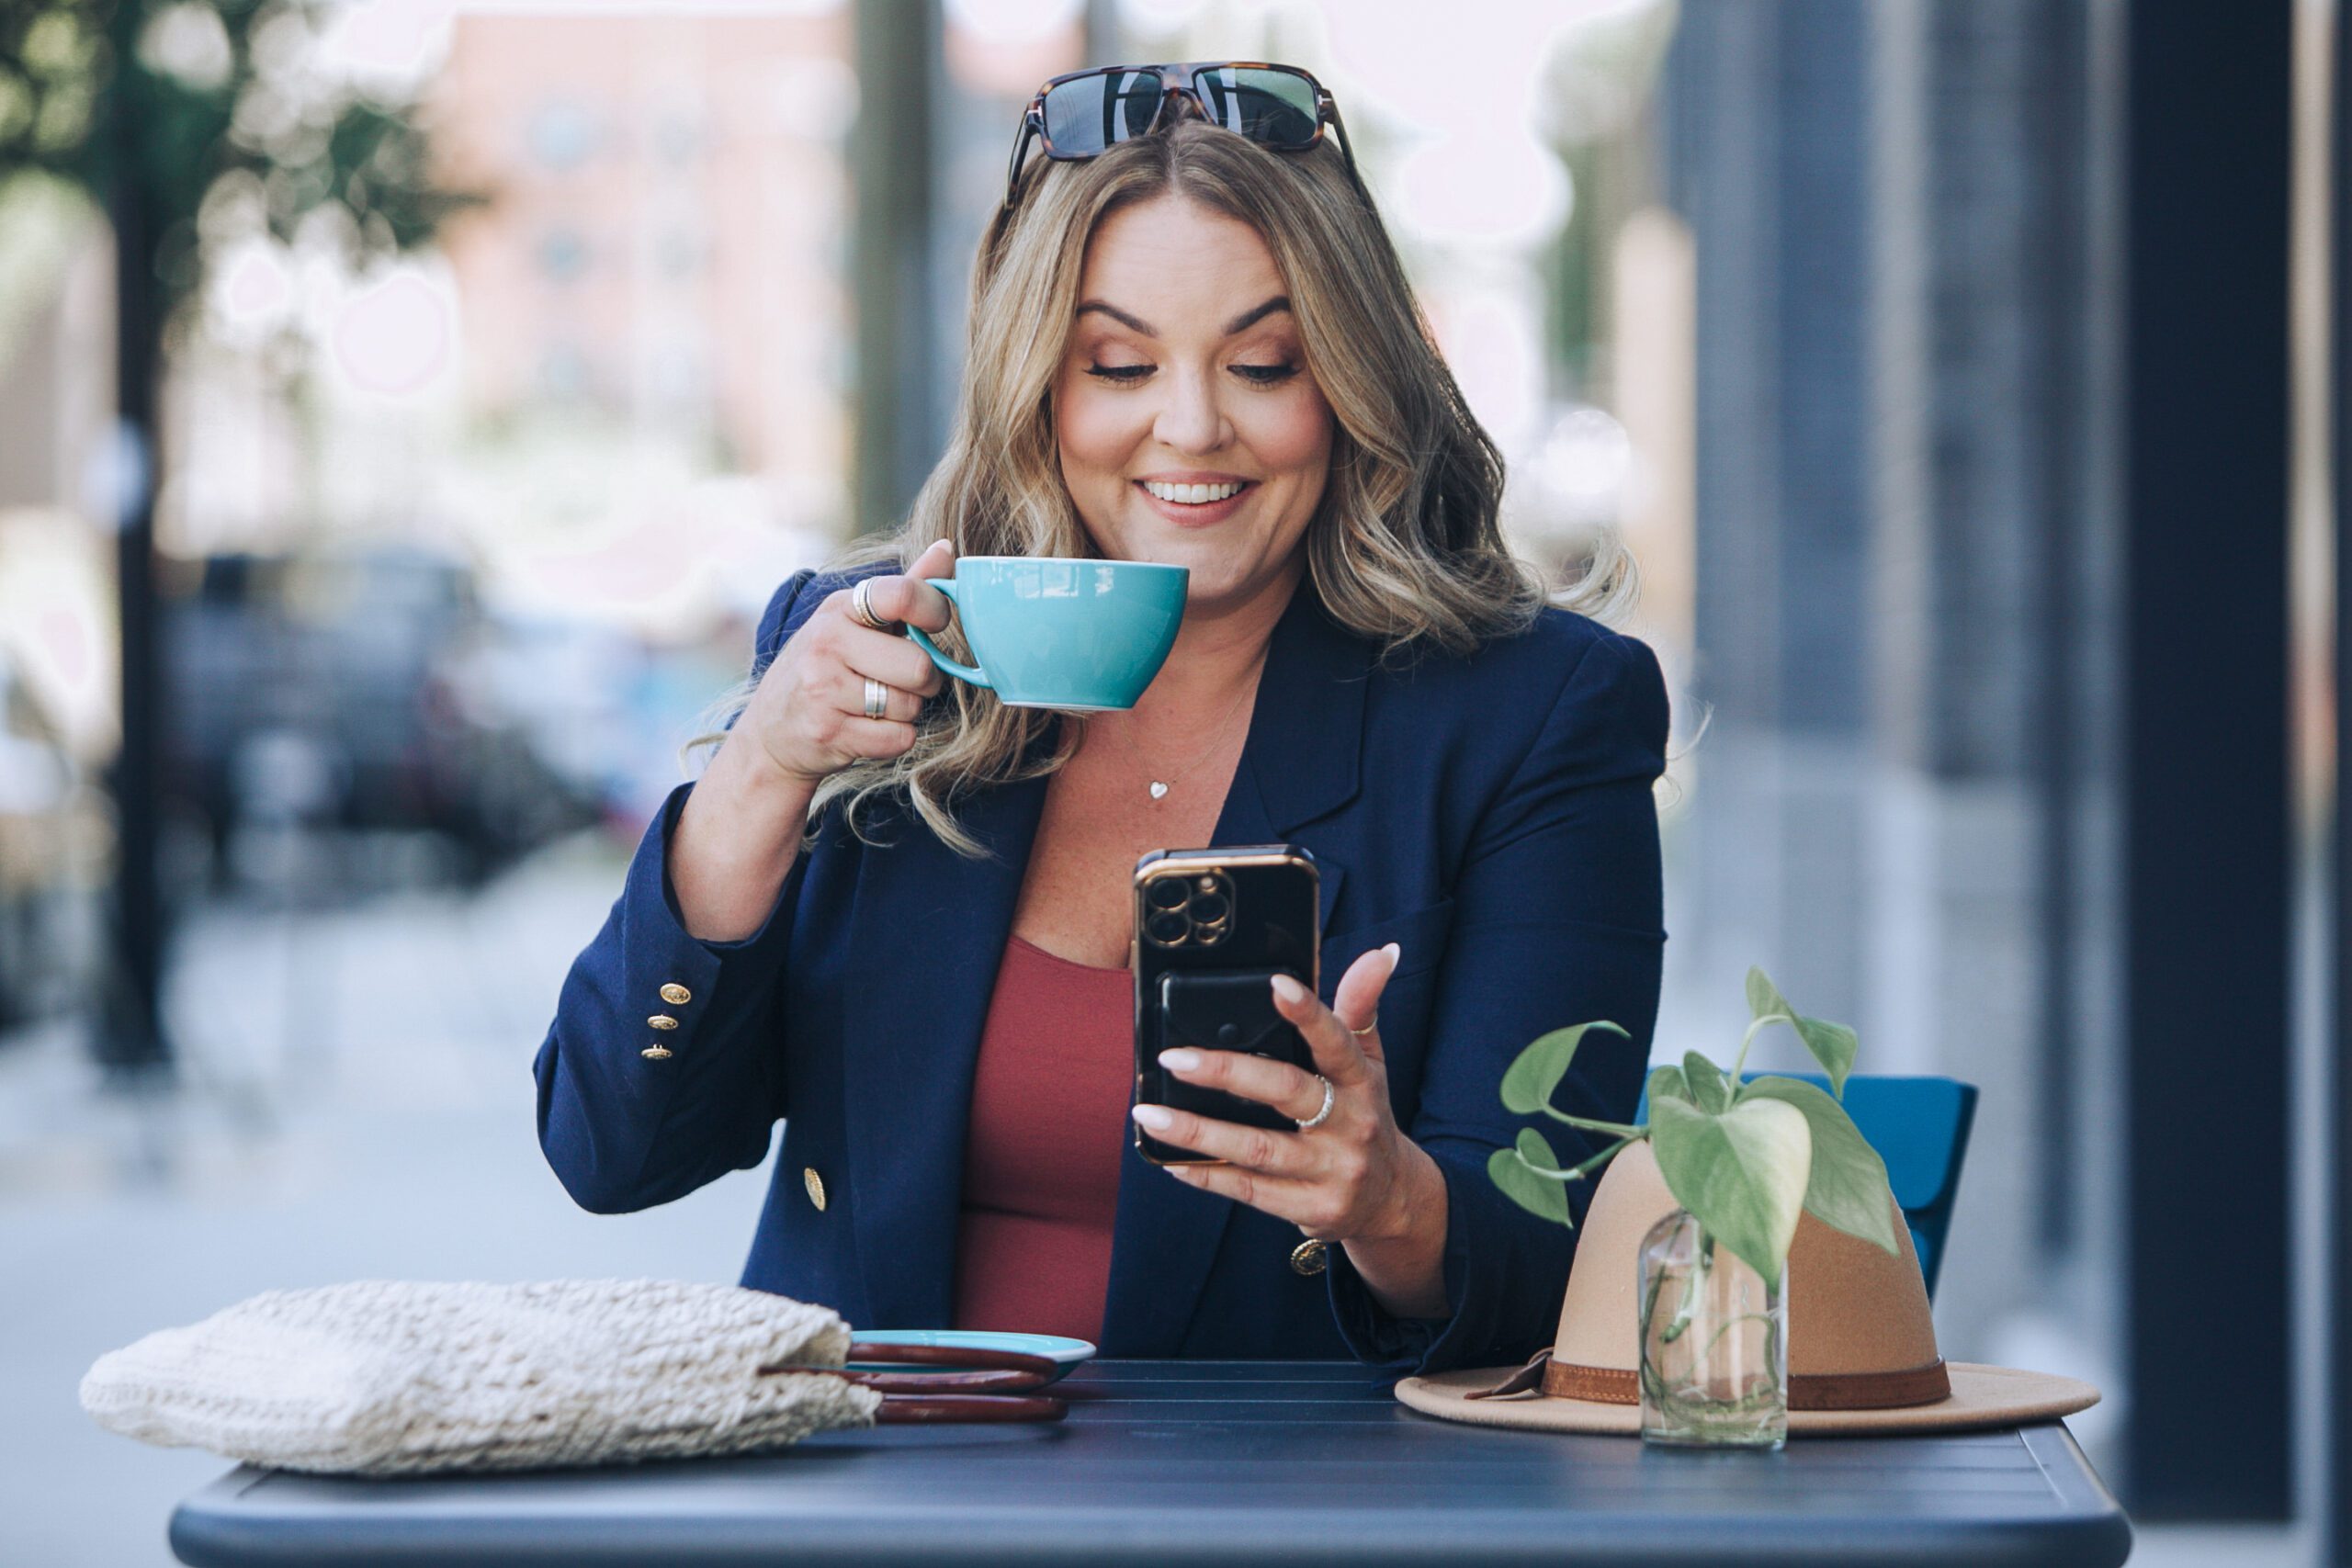 Businesswoman at a cafe checking her phone with a coffee cup in hand